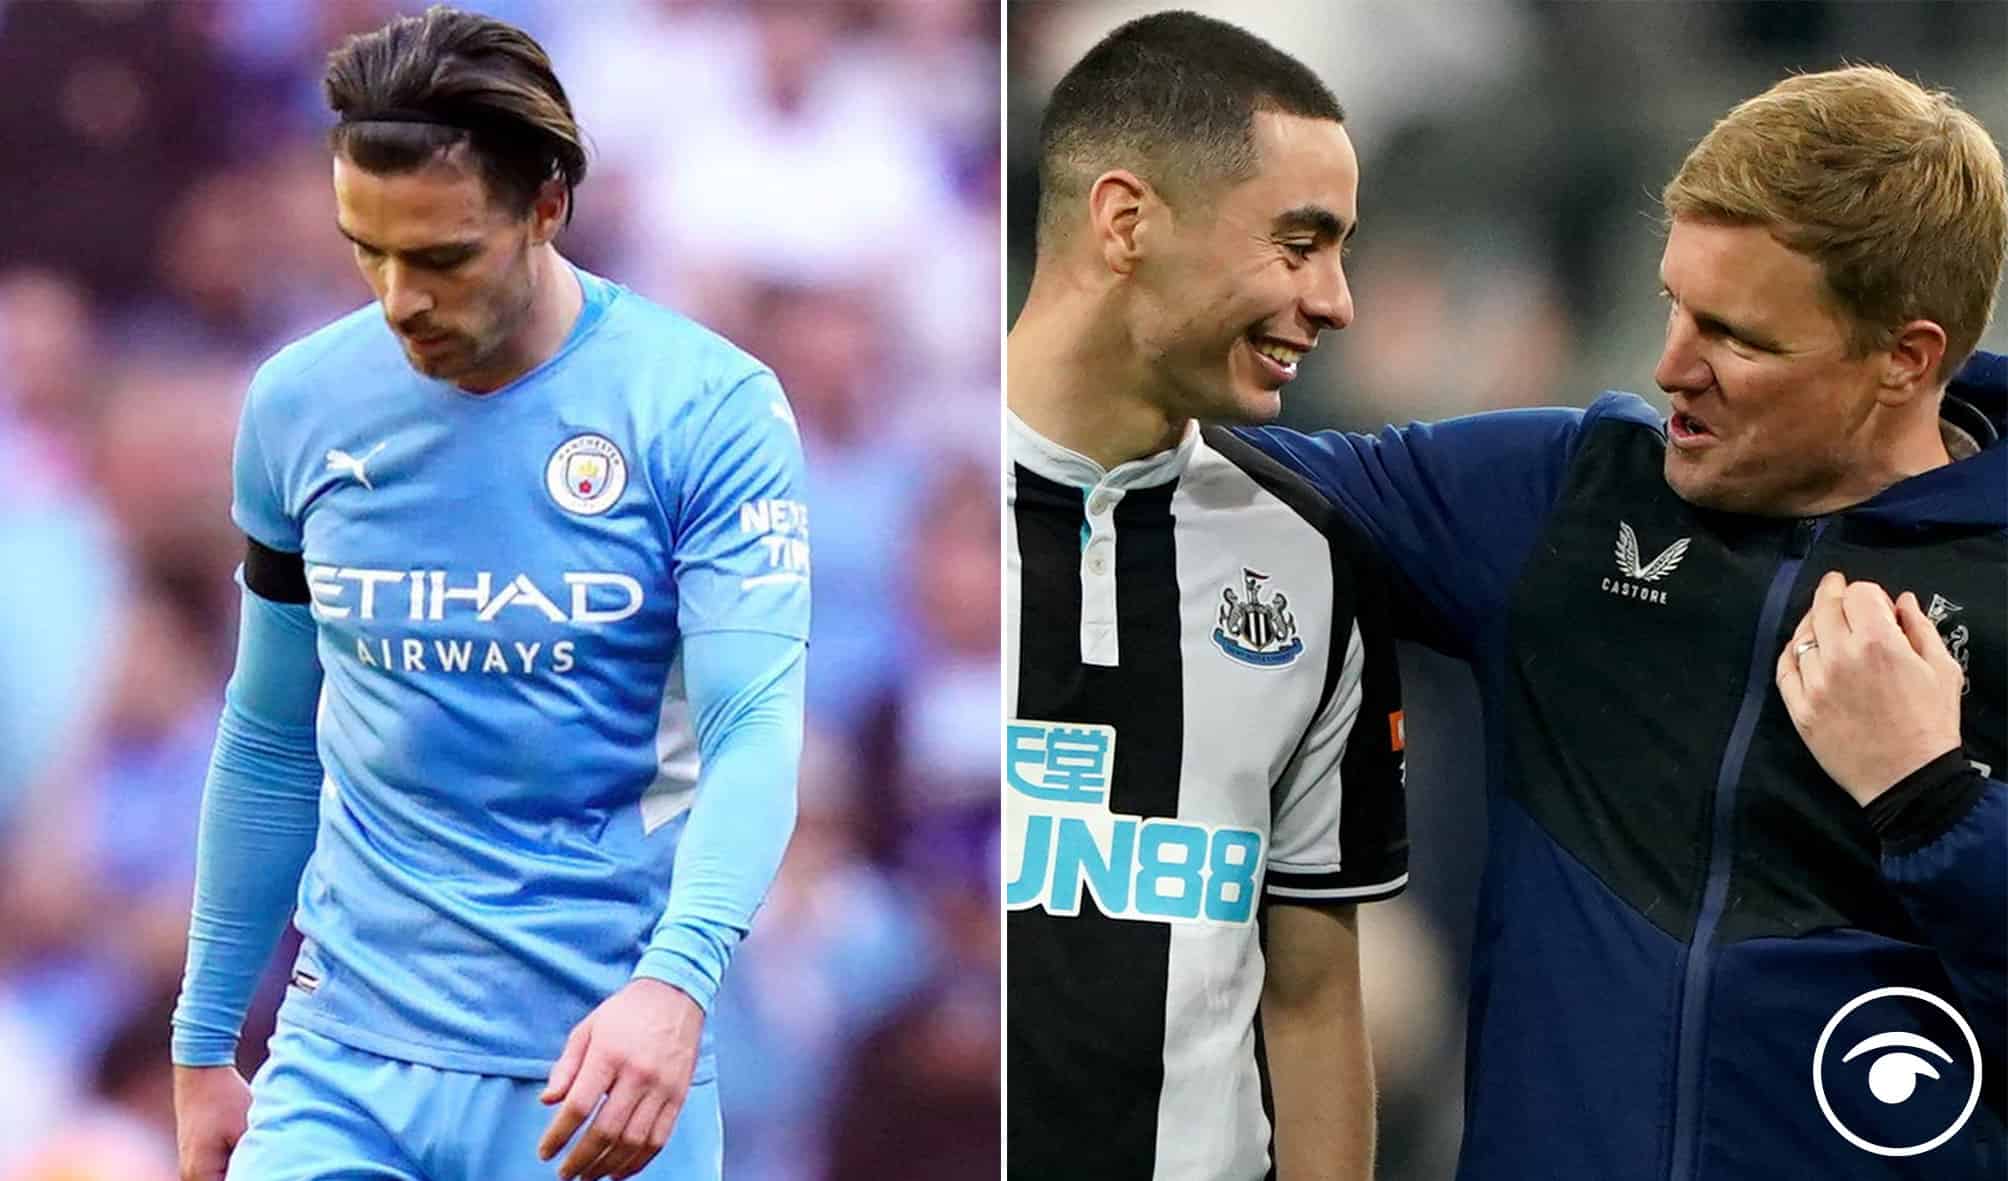 Newcastle United fans glee over Almiron story as Man City’s Grealish falters